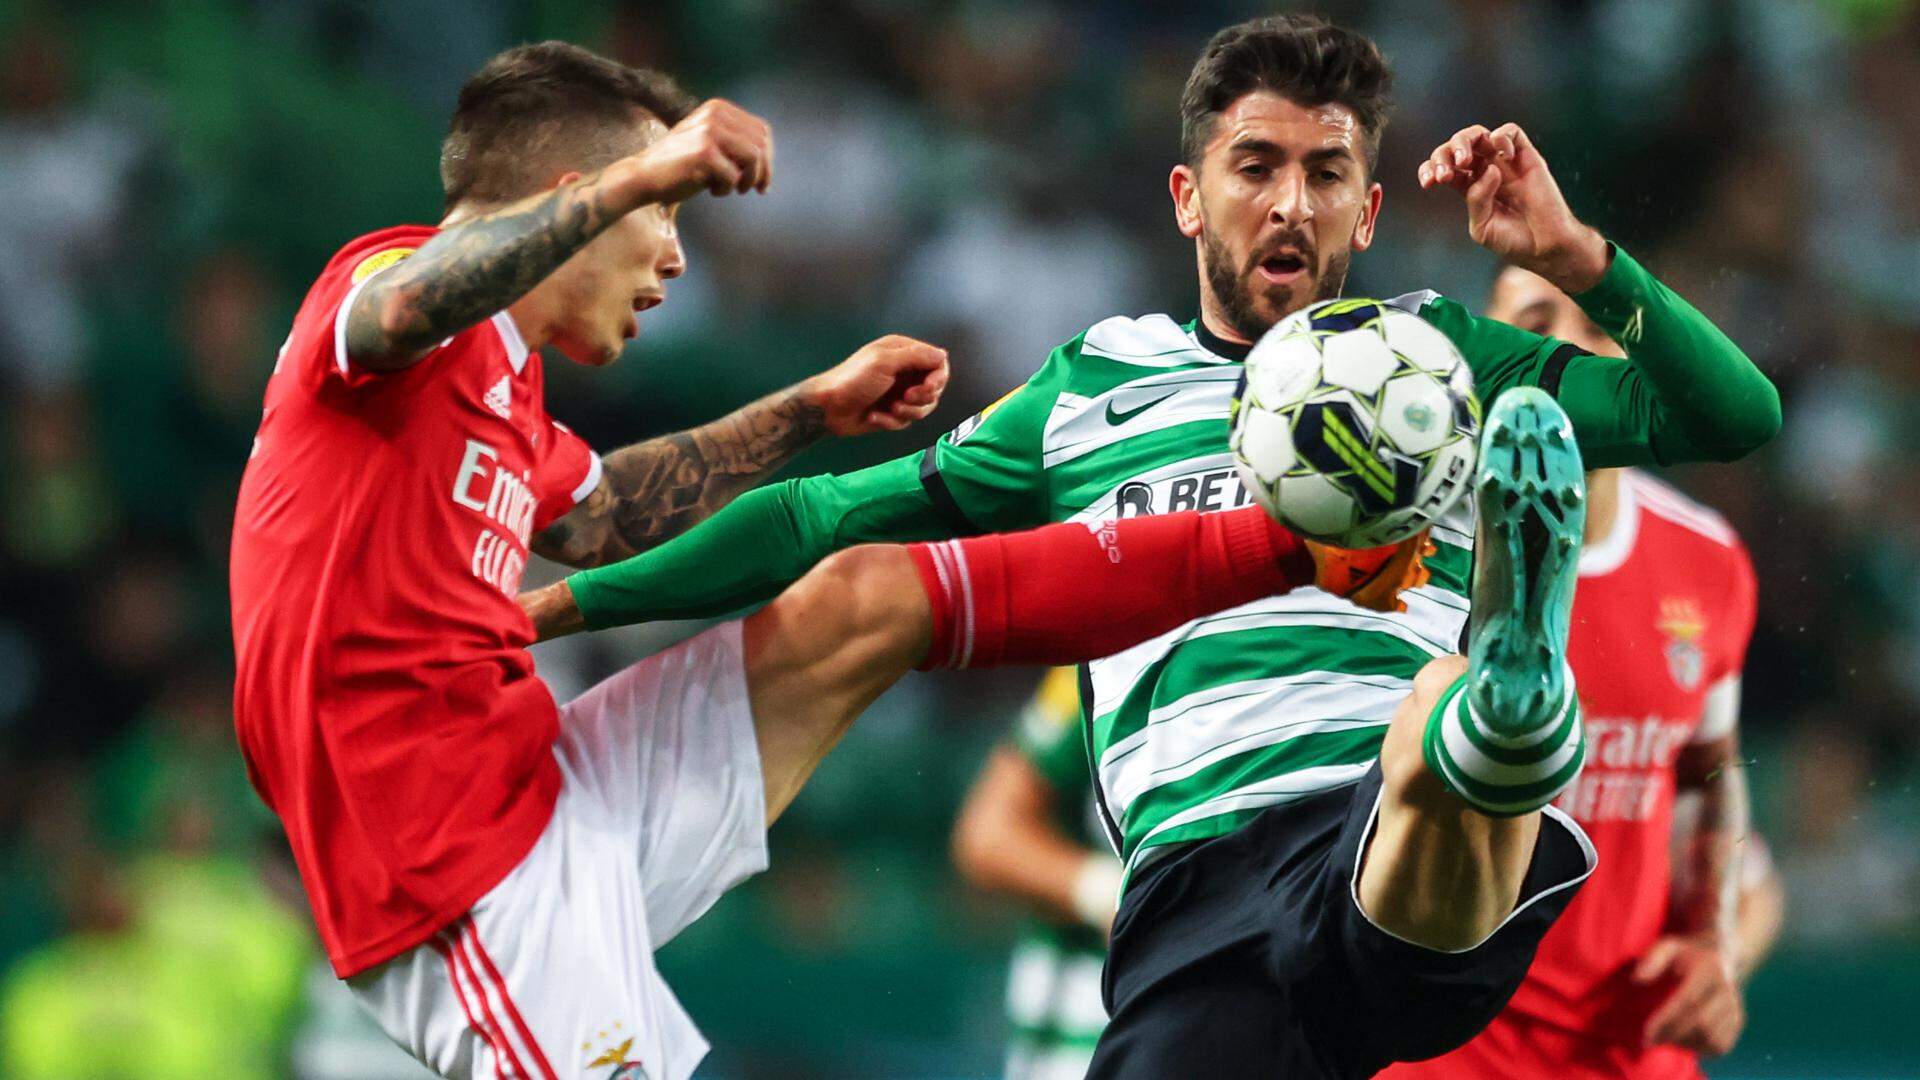 Sporting's CP Paulinho (R) in action against SL Benfica's Alex Grimaldo (L), during the Portuguese First League soccer match between Sporting CP vs SL Benfica, at Alvalade stadium in Lisbon, Portugal, 21 May 2023. NUNO VEIGA/LUSA